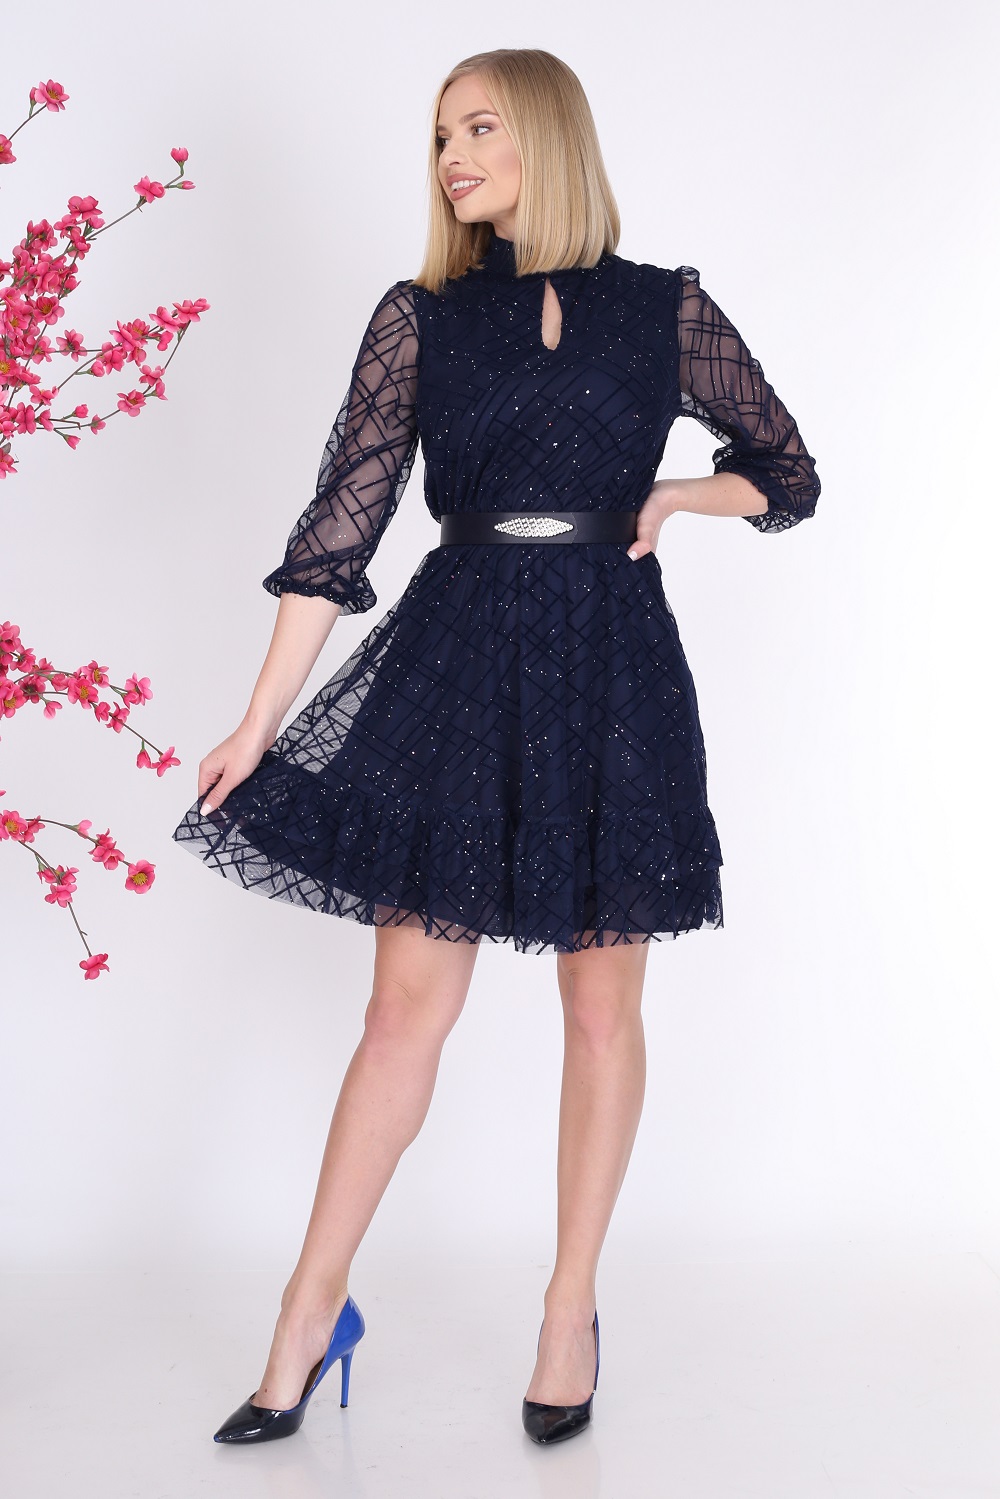 Silvery Dark Blue Color Tulle Dress